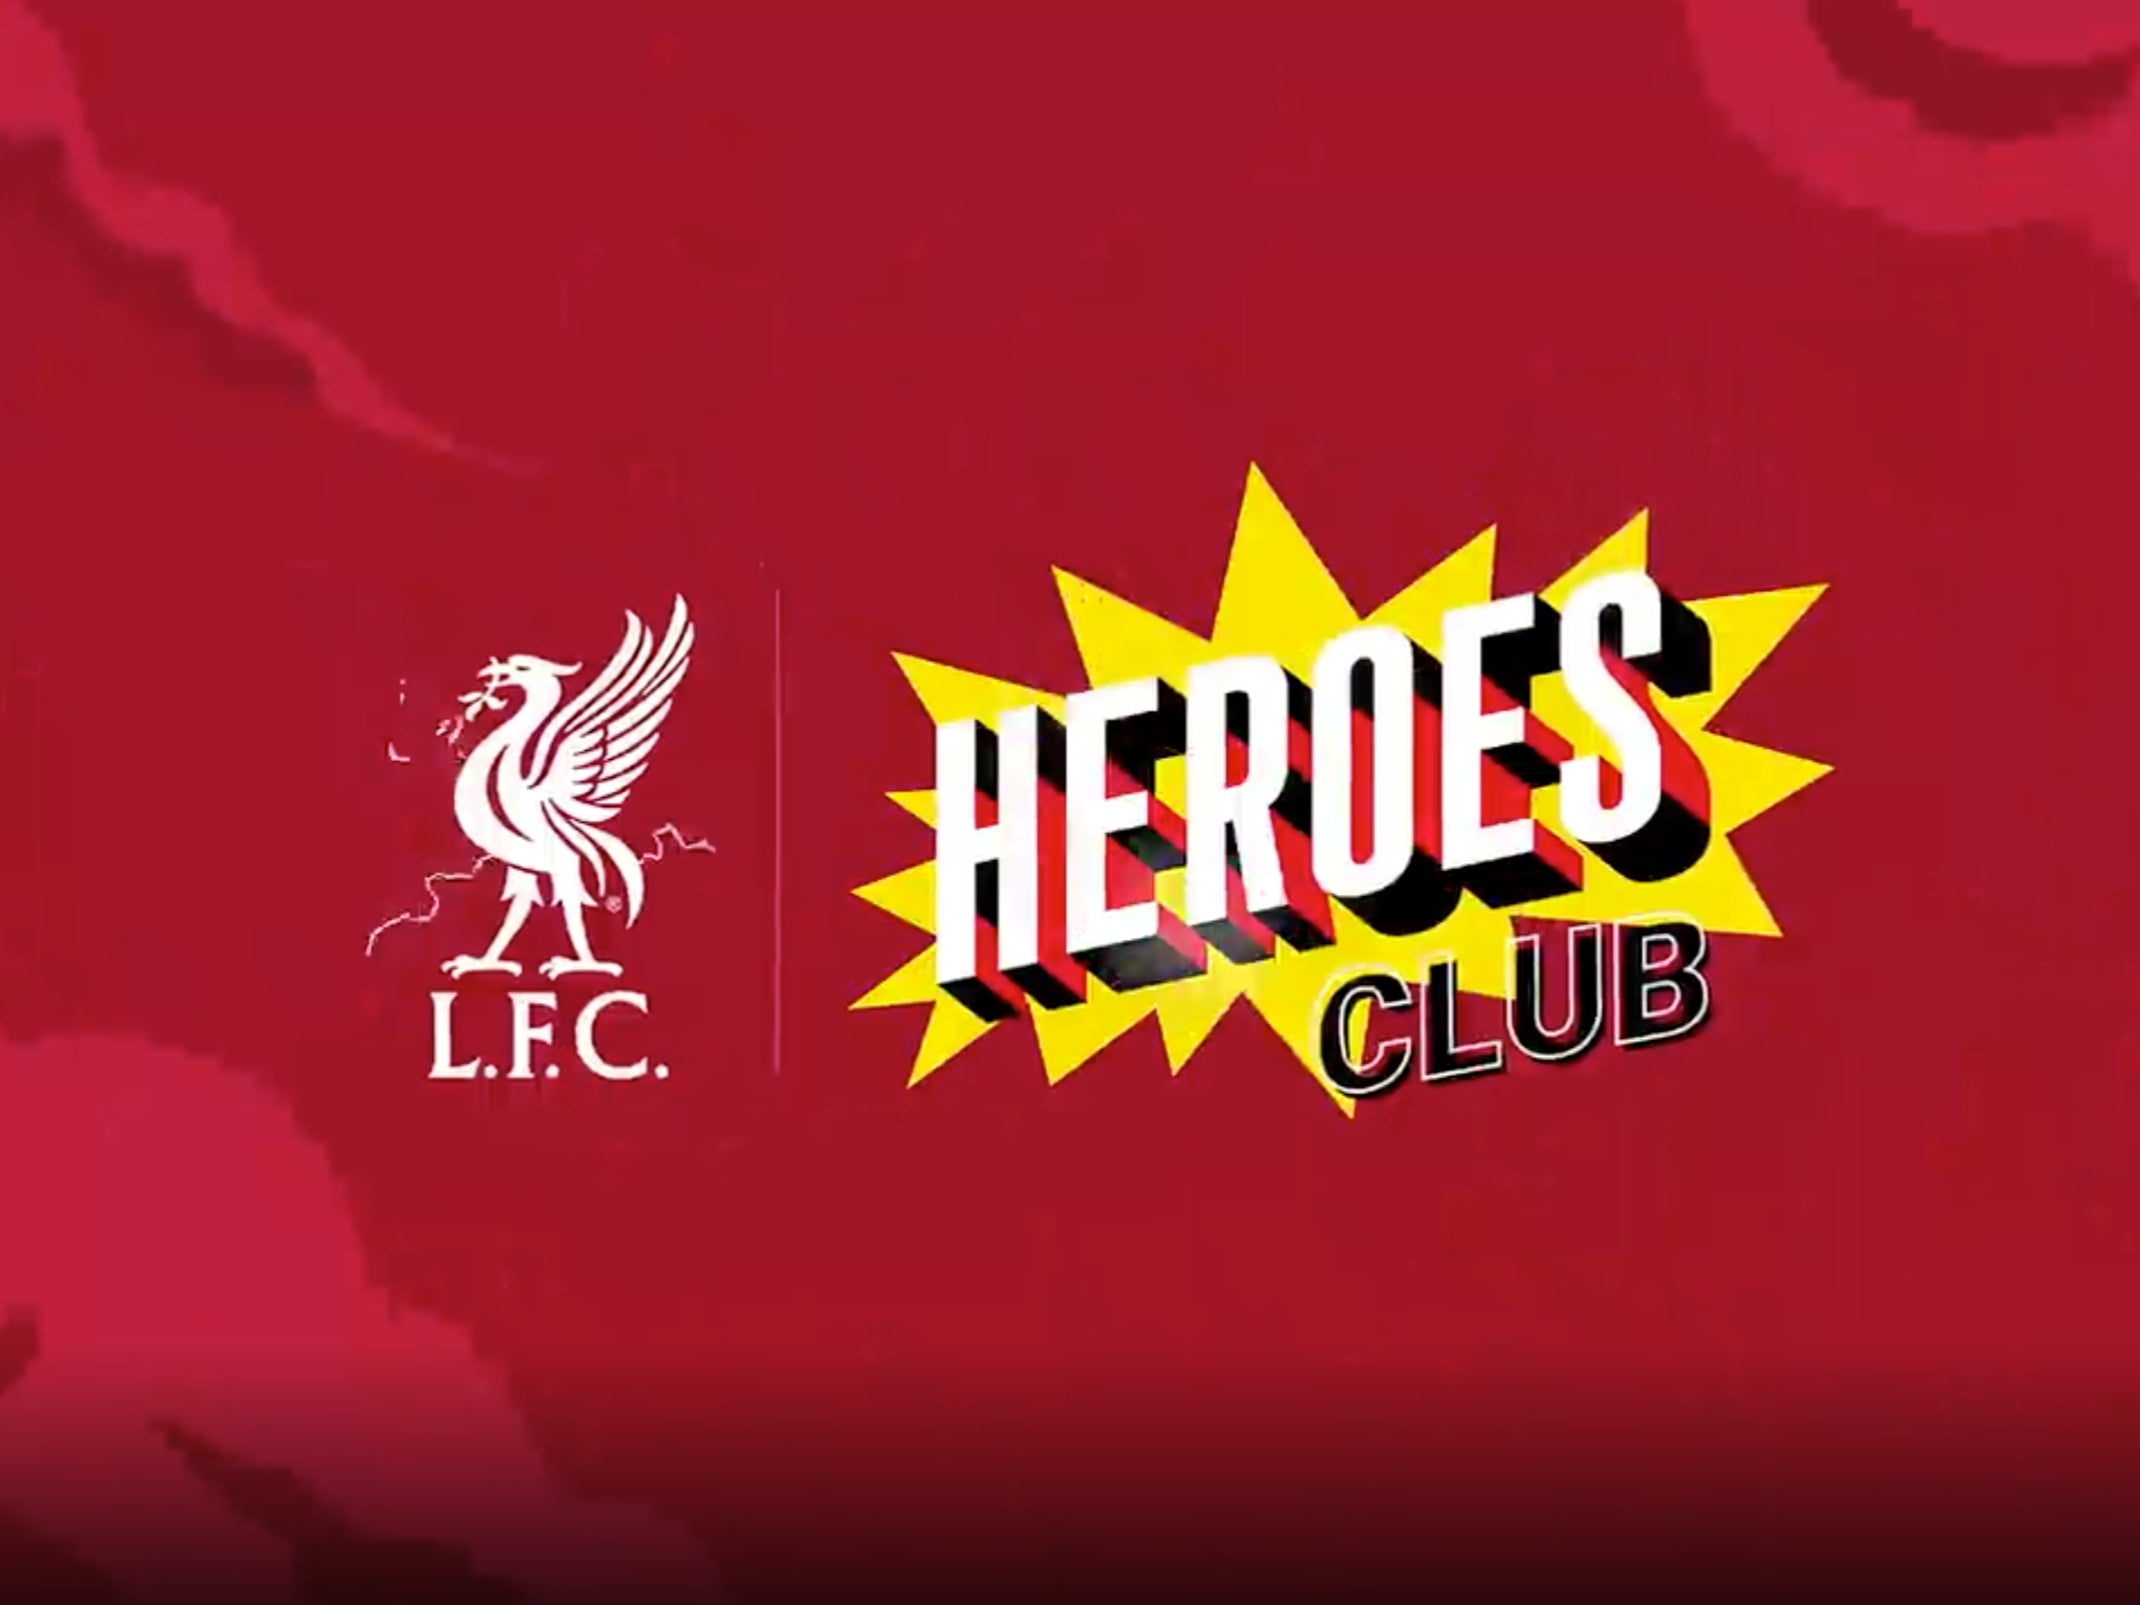 Liverpool are launching a collection of NFTs